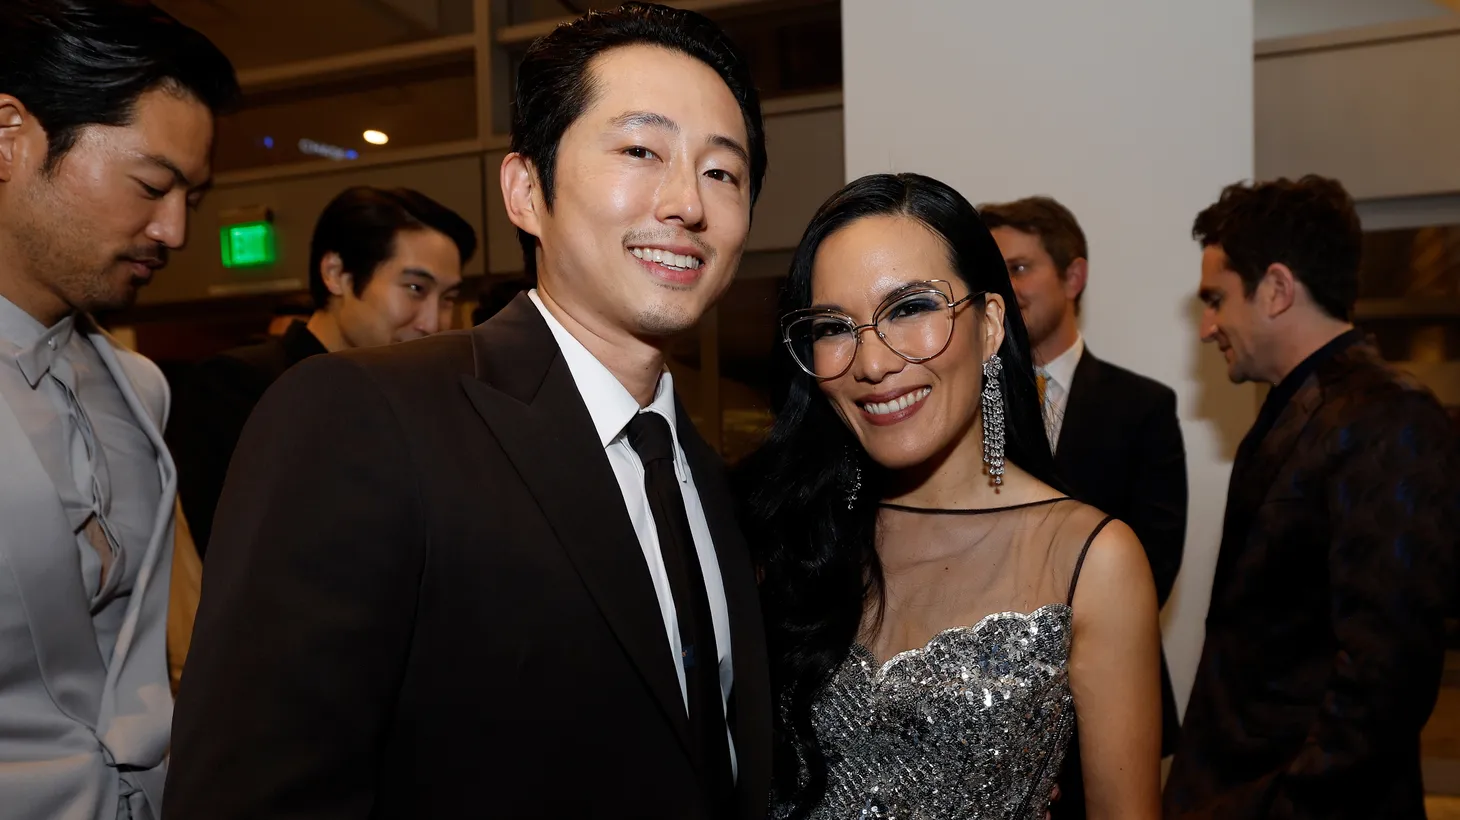 Actor Steven Yeun, pictured here with Beef co-star Ali Wong, discusses the joys (and occasional hives) that came with filming the awards season-sweeping Netflix limited series, which earned him two Emmys.